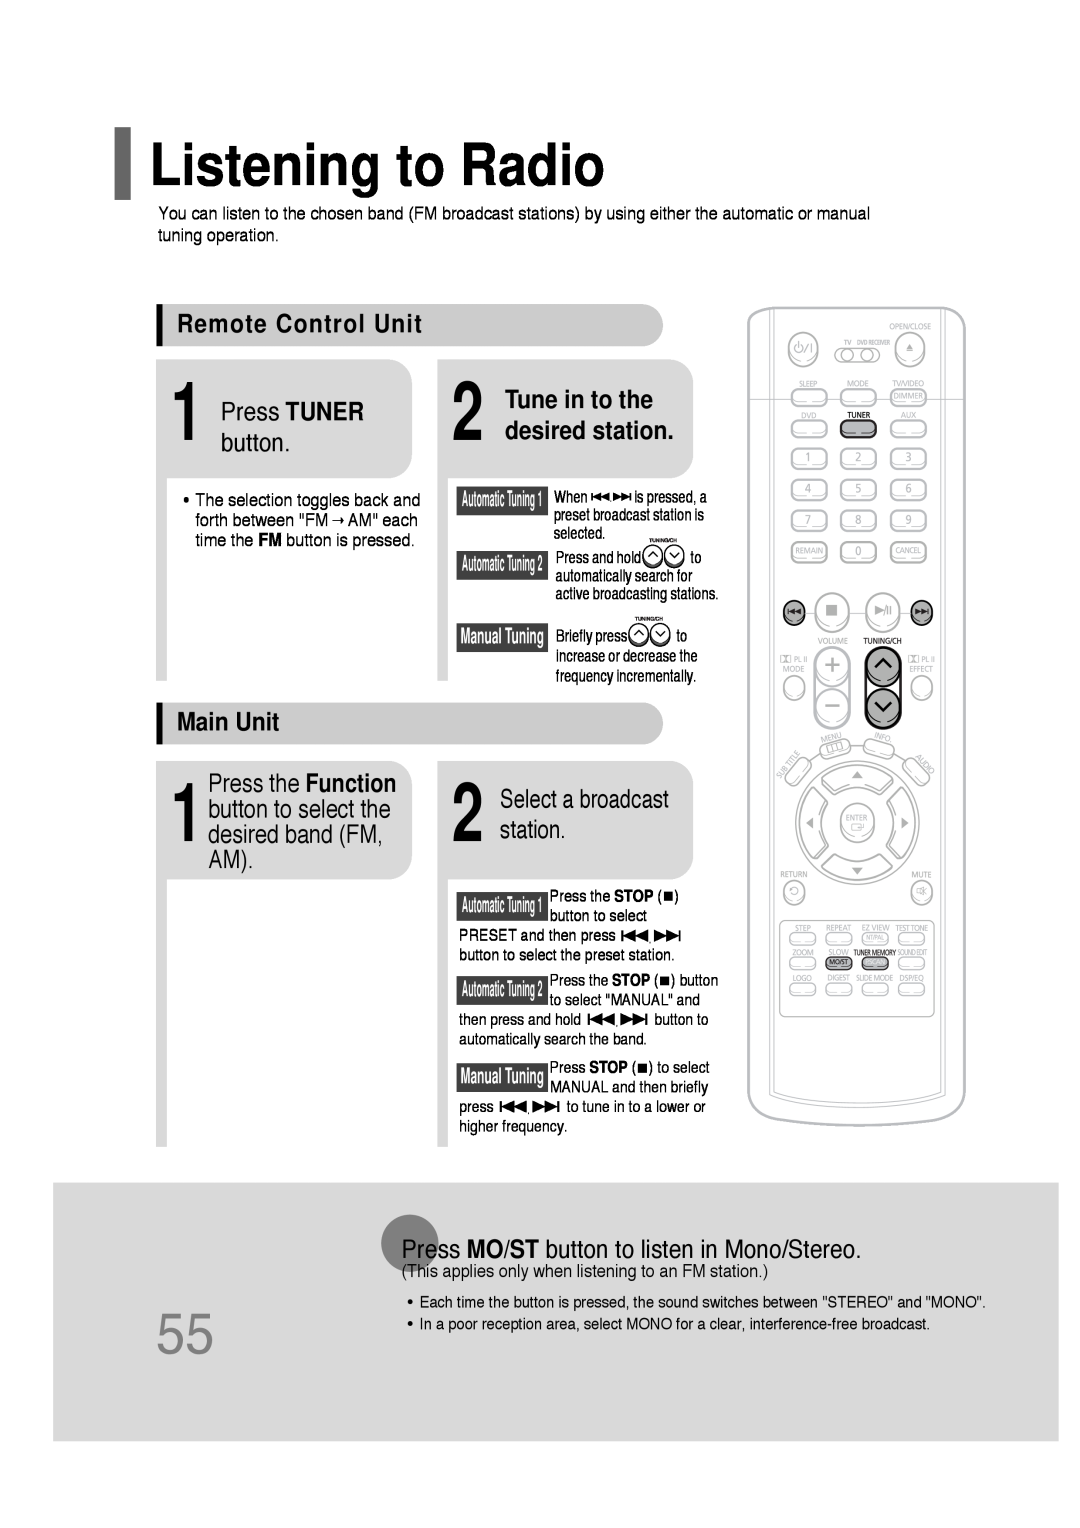 Samsung HT-P30 instruction manual Listening to Radio, Remote Control Unit, Main Unit, Press the Function, Pressbutton.TUNER 